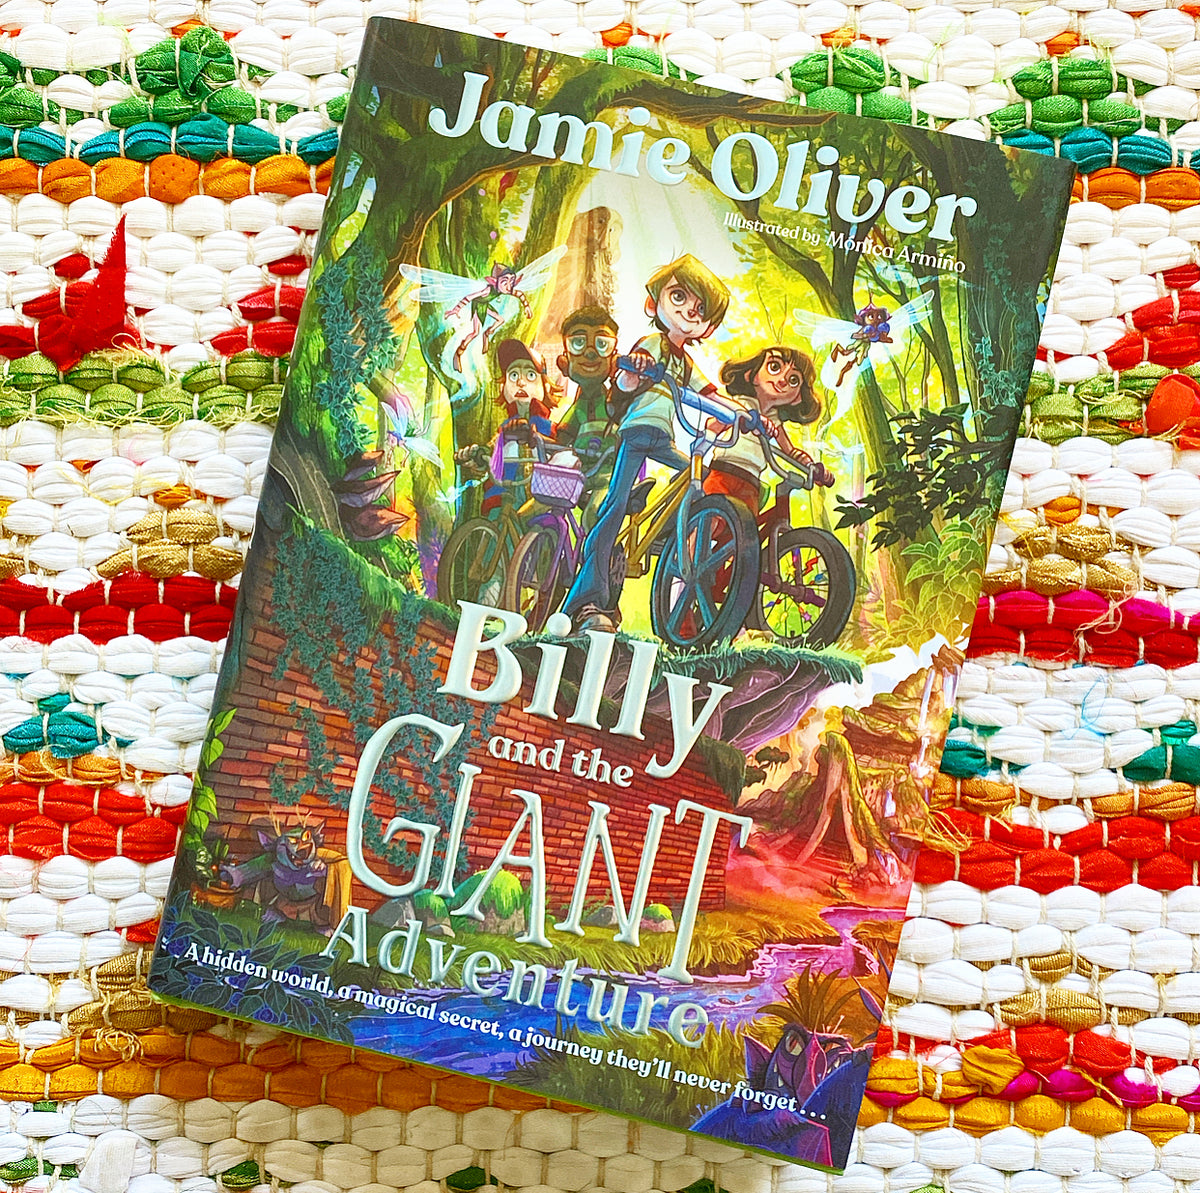 Billy And The Giant Adventure - By Jamie Oliver (hardcover) : Target